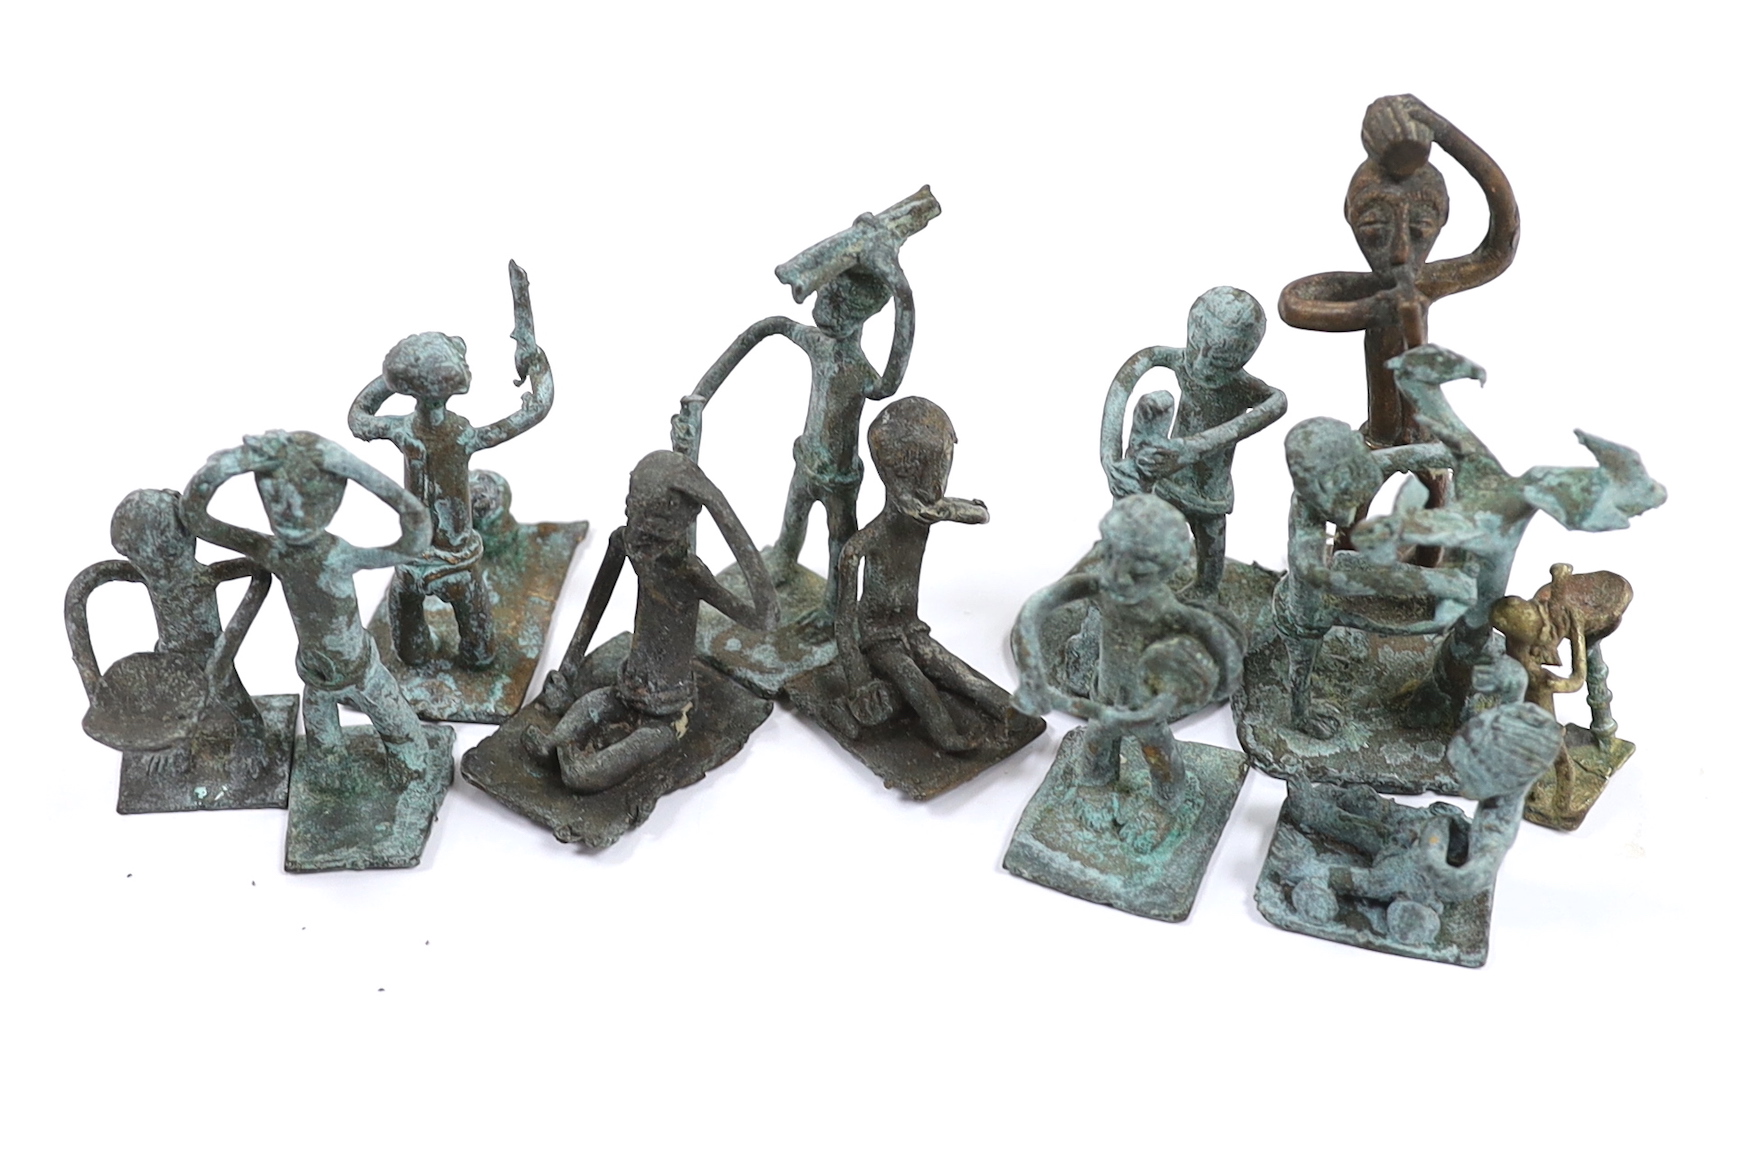 A collection of 20th century West African bronze figures, possibly gold weights, Ghana, Akan, box inscribed ‘West Africa. Gold Coast - attained in 1944 (Ghana)’, tallest 8.5cm